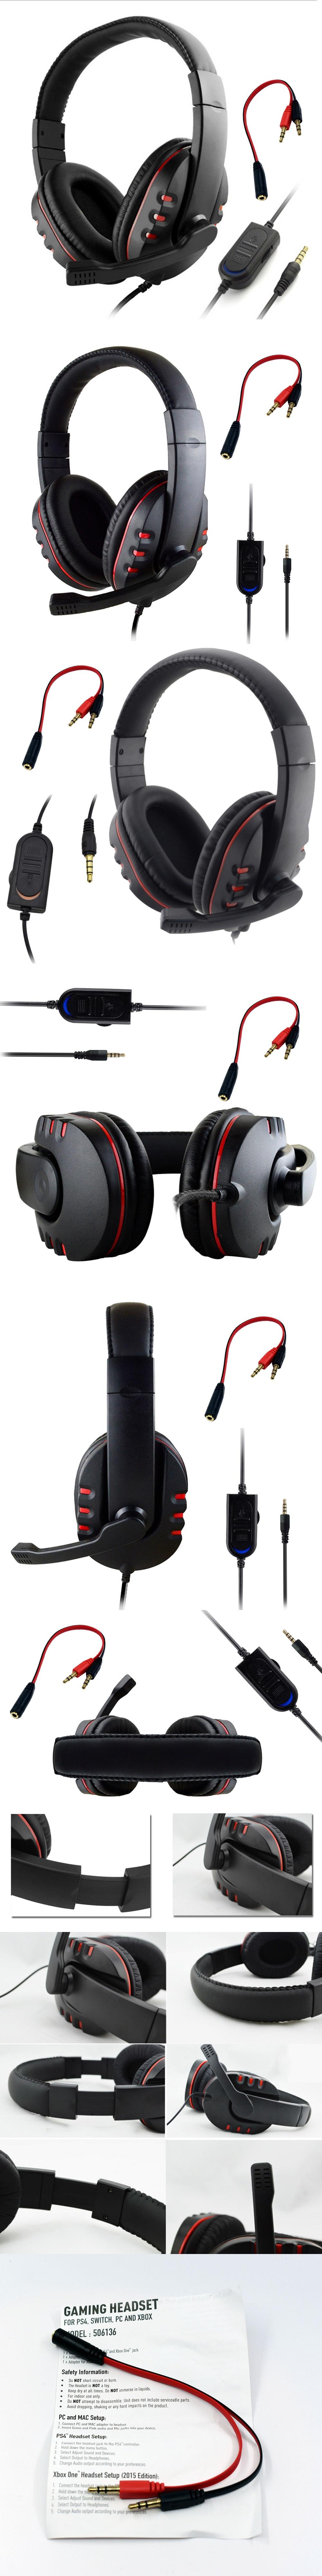 pc headset only has one jack